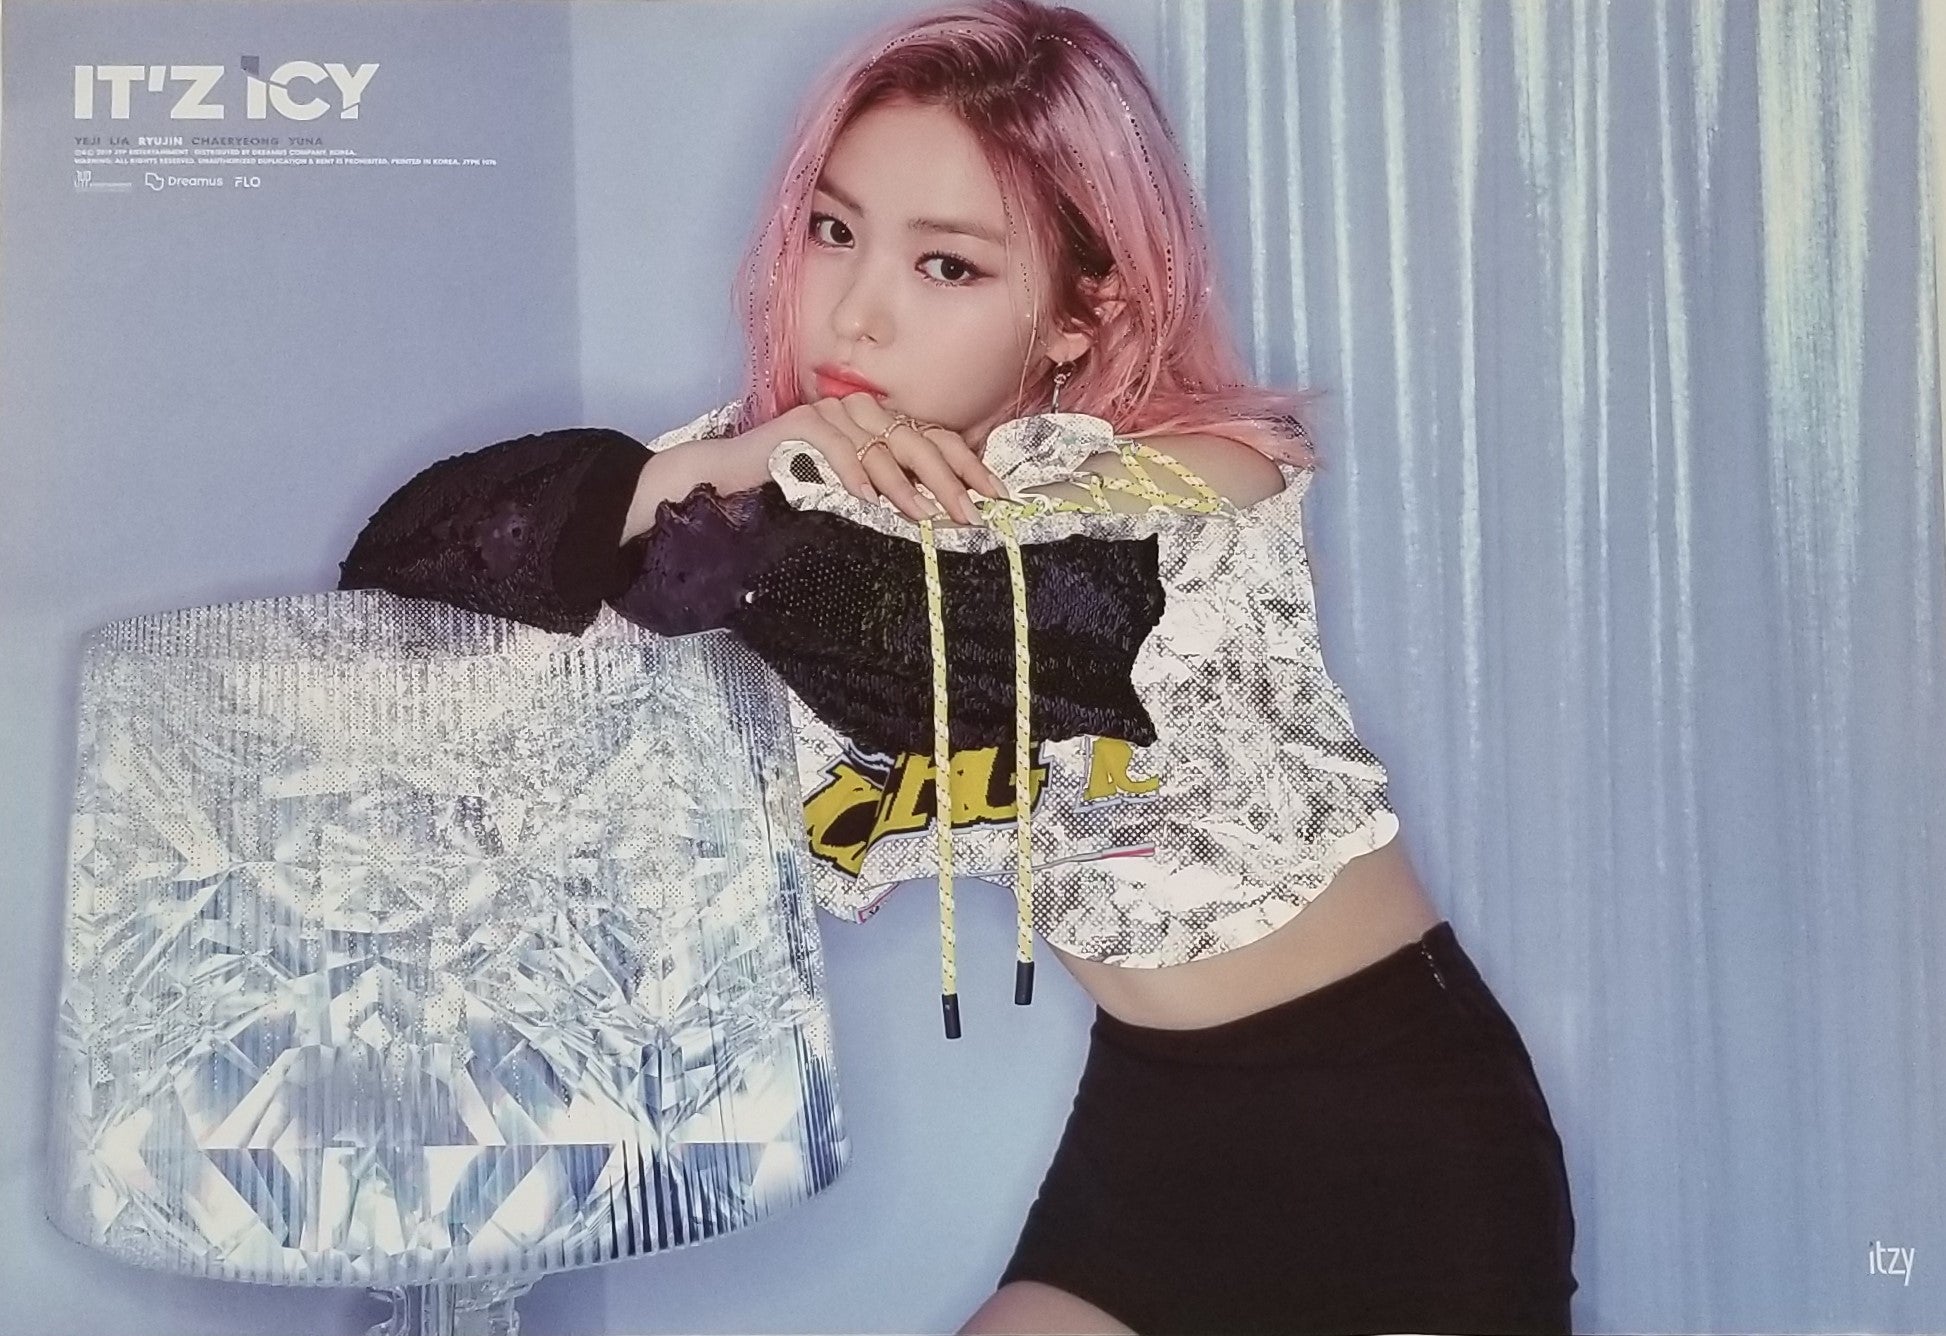 ITZY IT'Z ICY Official Poster - Ryujin Photo Concept – Choice Music LA